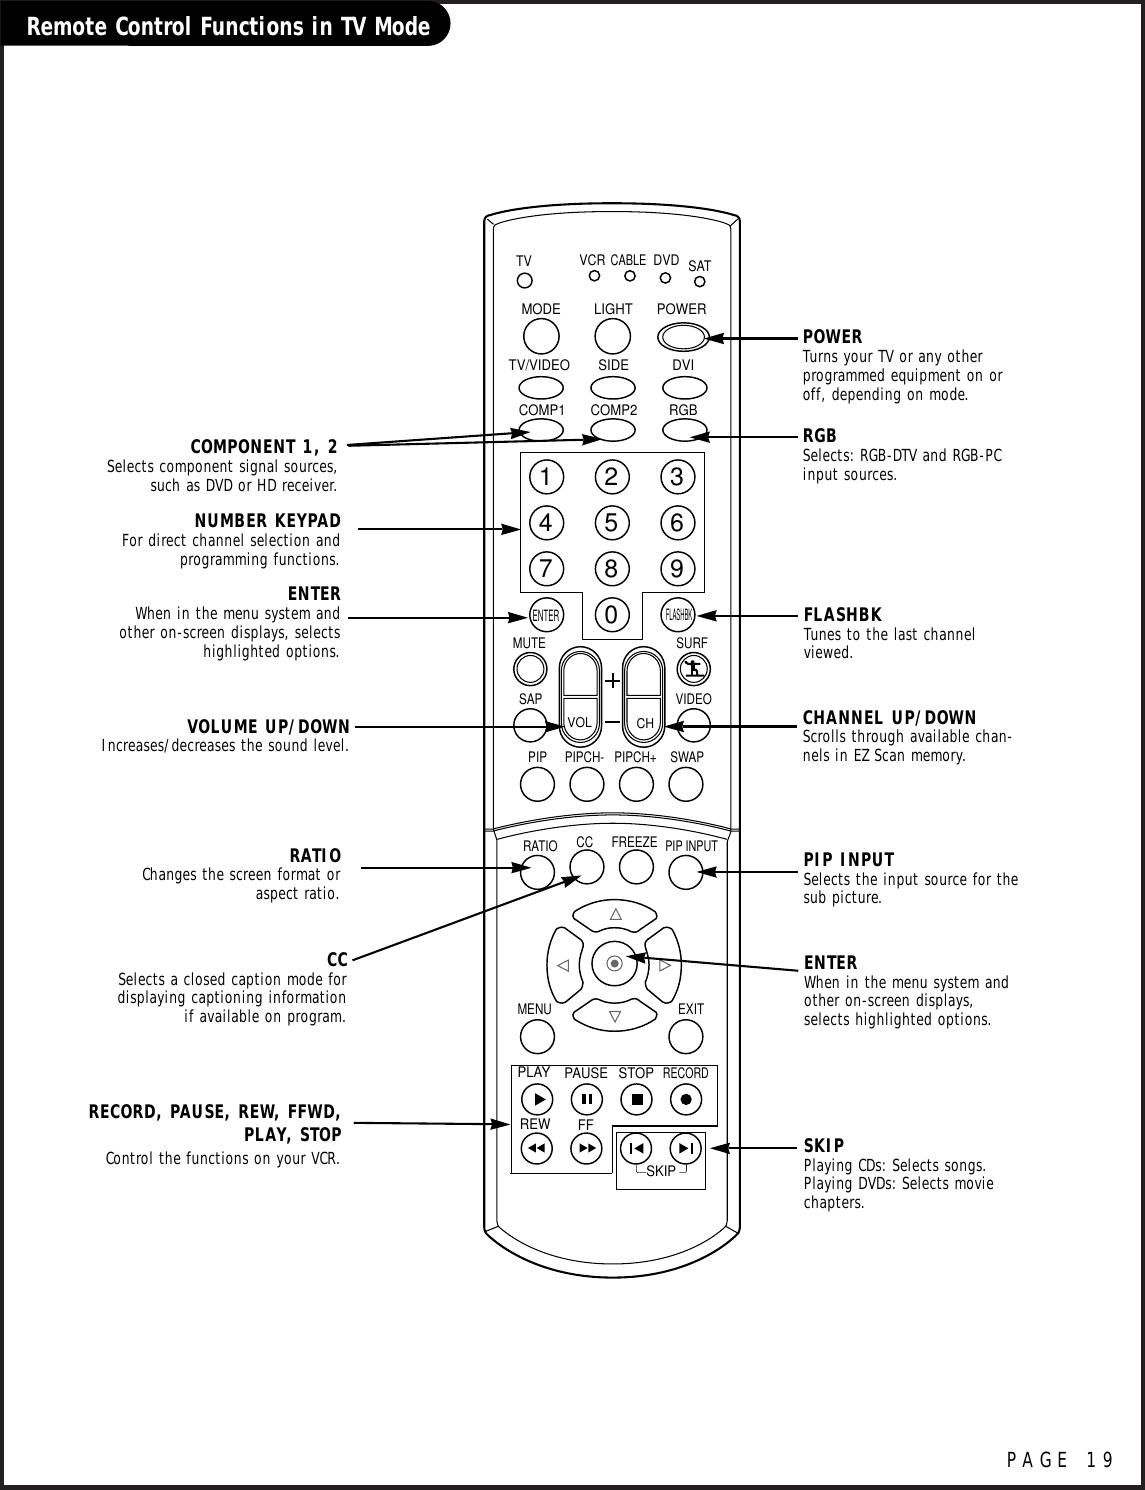 Remote Control Functions in TV ModePAGE 191234567890TVMODE LIGHT POWER   TV/VIDEO DVIRGBVCRCABLEDVD SATMUTESWAPPIPCH- PIPCH+PIPRATIORECORDSTOPPAUSEREWPLAYFFMENU EXITCC FREEZEPIP INPUTVOL CHSURFSAP VIDEOCOMP2COMP1SIDESKIPENTERFLASHBKPOWERTurns your TV or any otherprogrammed equipment on oroff, depending on mode.CHANNEL UP/DOWNScrolls through available chan-nels in EZ Scan memory.NUMBER KEYPADFor direct channel selection and programming functions.ENTERWhen in the menu system andother on-screen displays,selects highlighted options.RECORD, PAUSE, REW, FFWD,PLAY, STOPControl the functions on your VCR.VOLUME UP/DOWNIncreases/decreases the sound level.RATIOChanges the screen format oraspect ratio.SKIPPlaying CDs: Selects songs.Playing DVDs: Selects moviechapters.COMPONENT 1, 2Selects component signal sources,such as DVD or HD receiver.ENTERWhen in the menu system andother on-screen displays, selectshighlighted options.FLASHBKTunes to the last channelviewed.CCSelects a closed caption mode fordisplaying captioning informationif available on program.PIP INPUTSelects the input source for thesub picture.RGBSelects: RGB-DTV and RGB-PCinput sources.